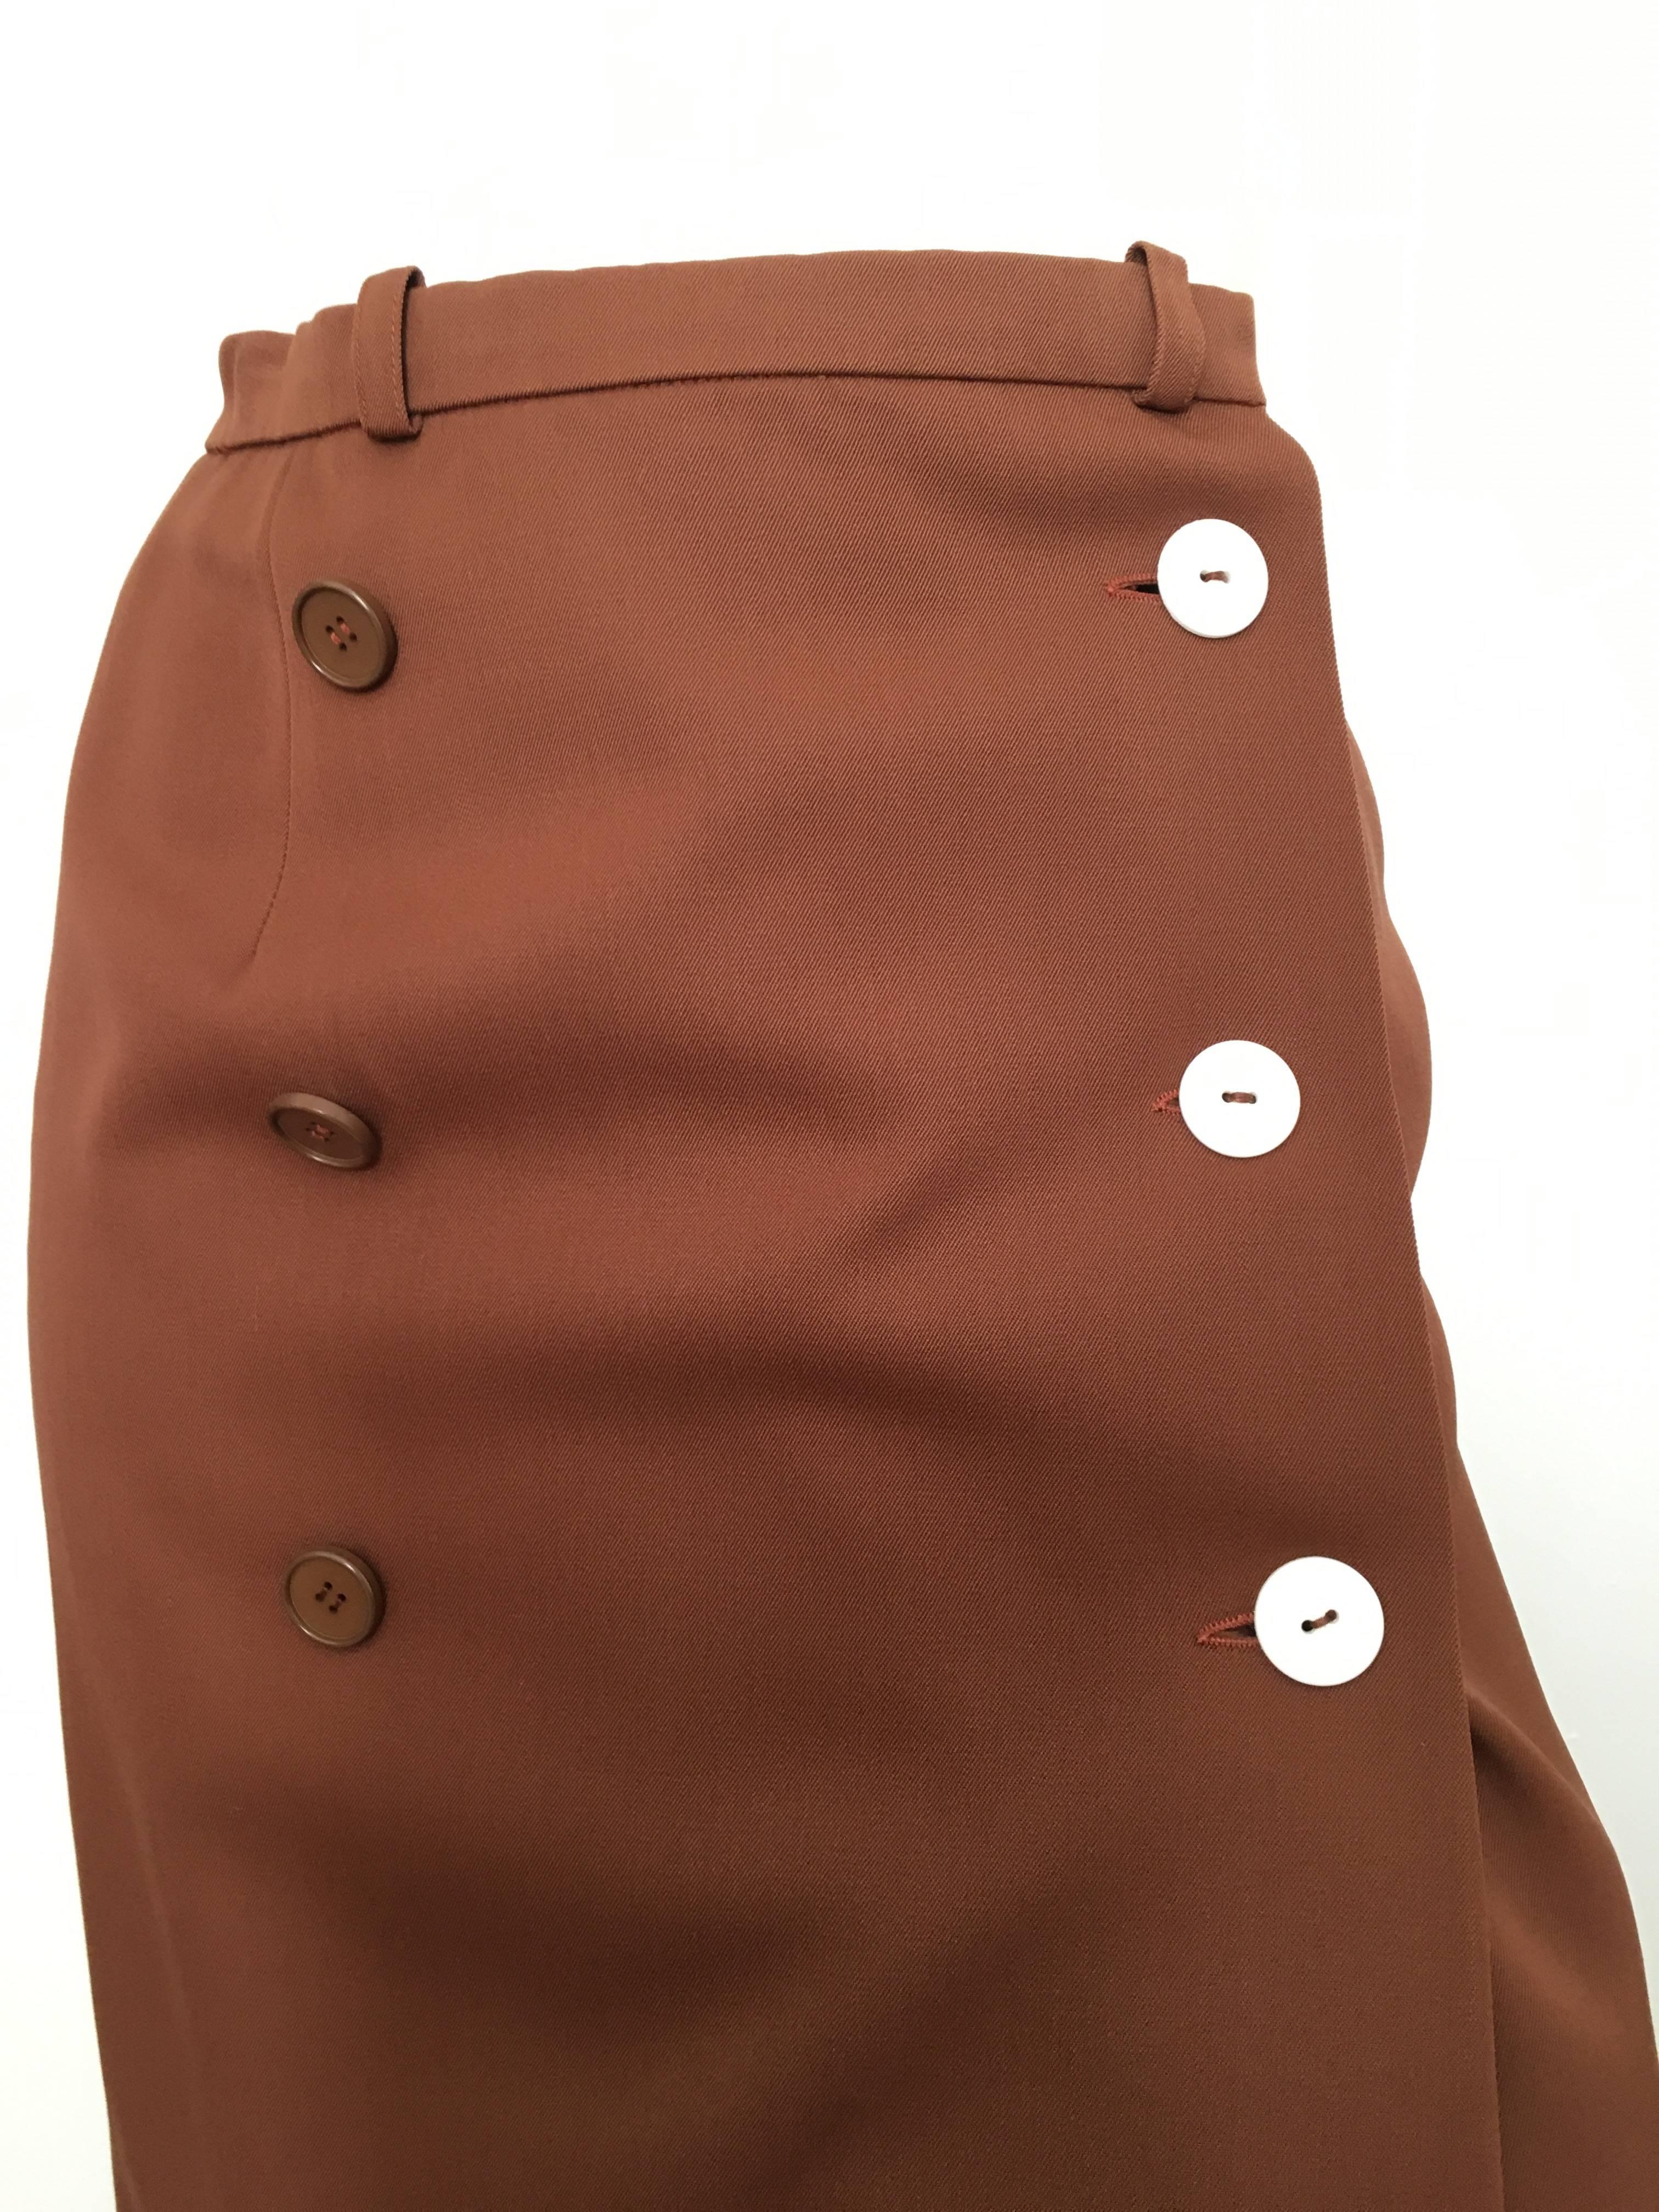 Valentino Boutique 1970s brown wool wrap skirt is a vintage size 8 but fits like a modern USA size 4.  Ladies please take out that measuring tape and properly measure your waist so you know this will fit you properly when it arrives.  Brown silk